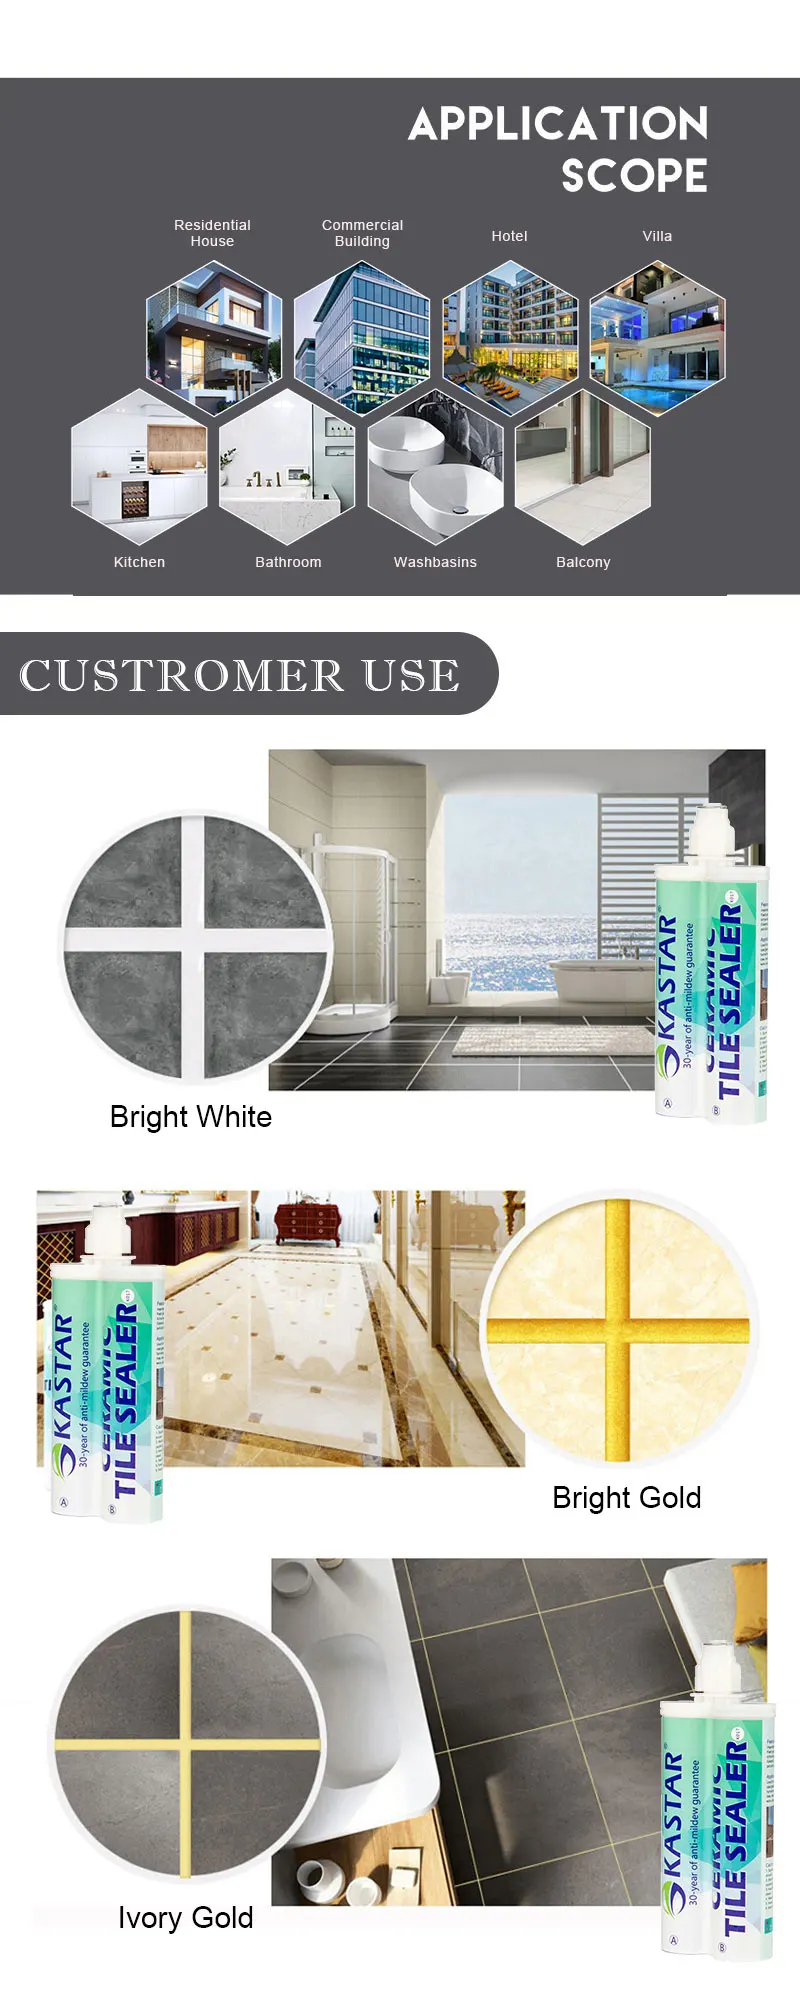 Easy To Operate Premixing Water Resistant Ageing Resistance Tile Glue Adhesive For House Decoration